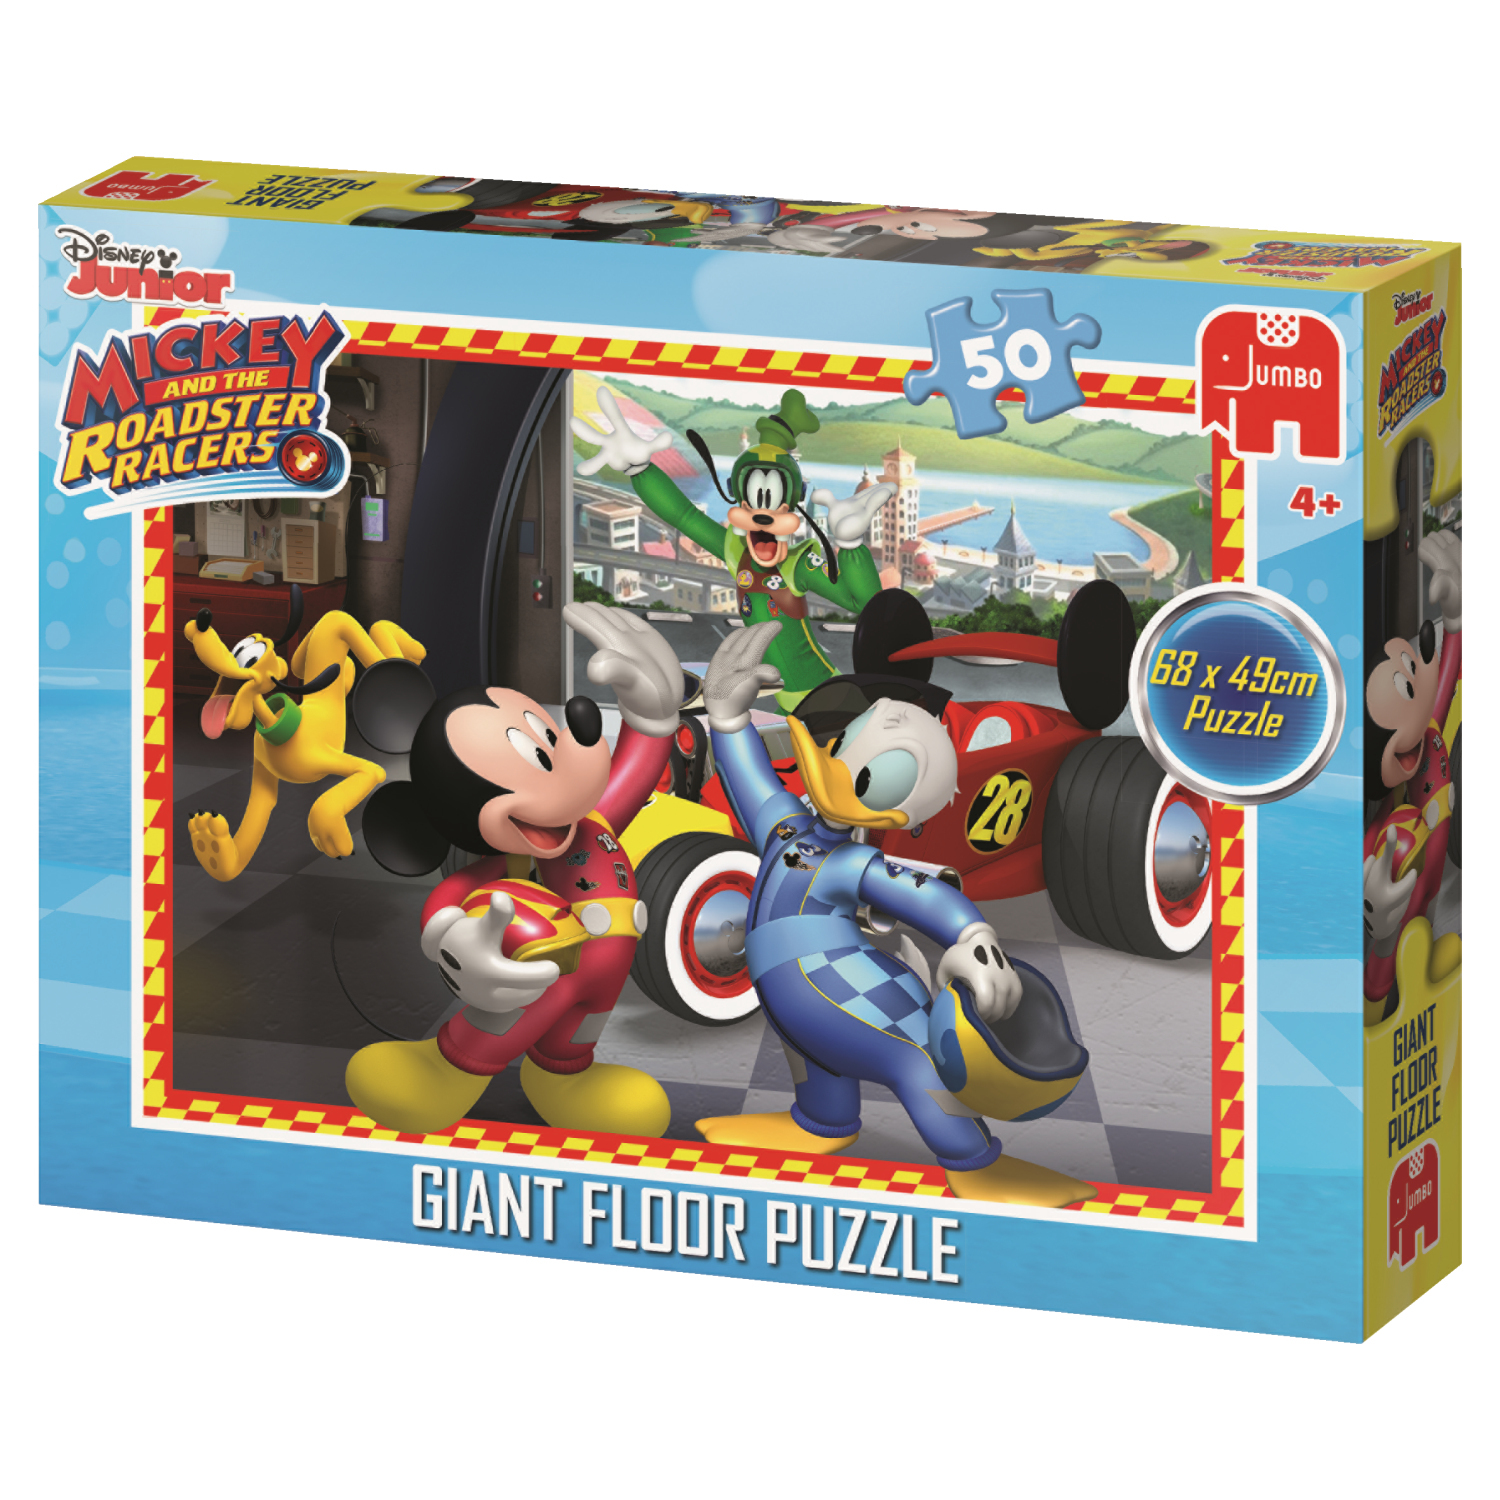 Jumbo Mickey and the Roadster Racers Giant Floor Puzzle 50 pcs